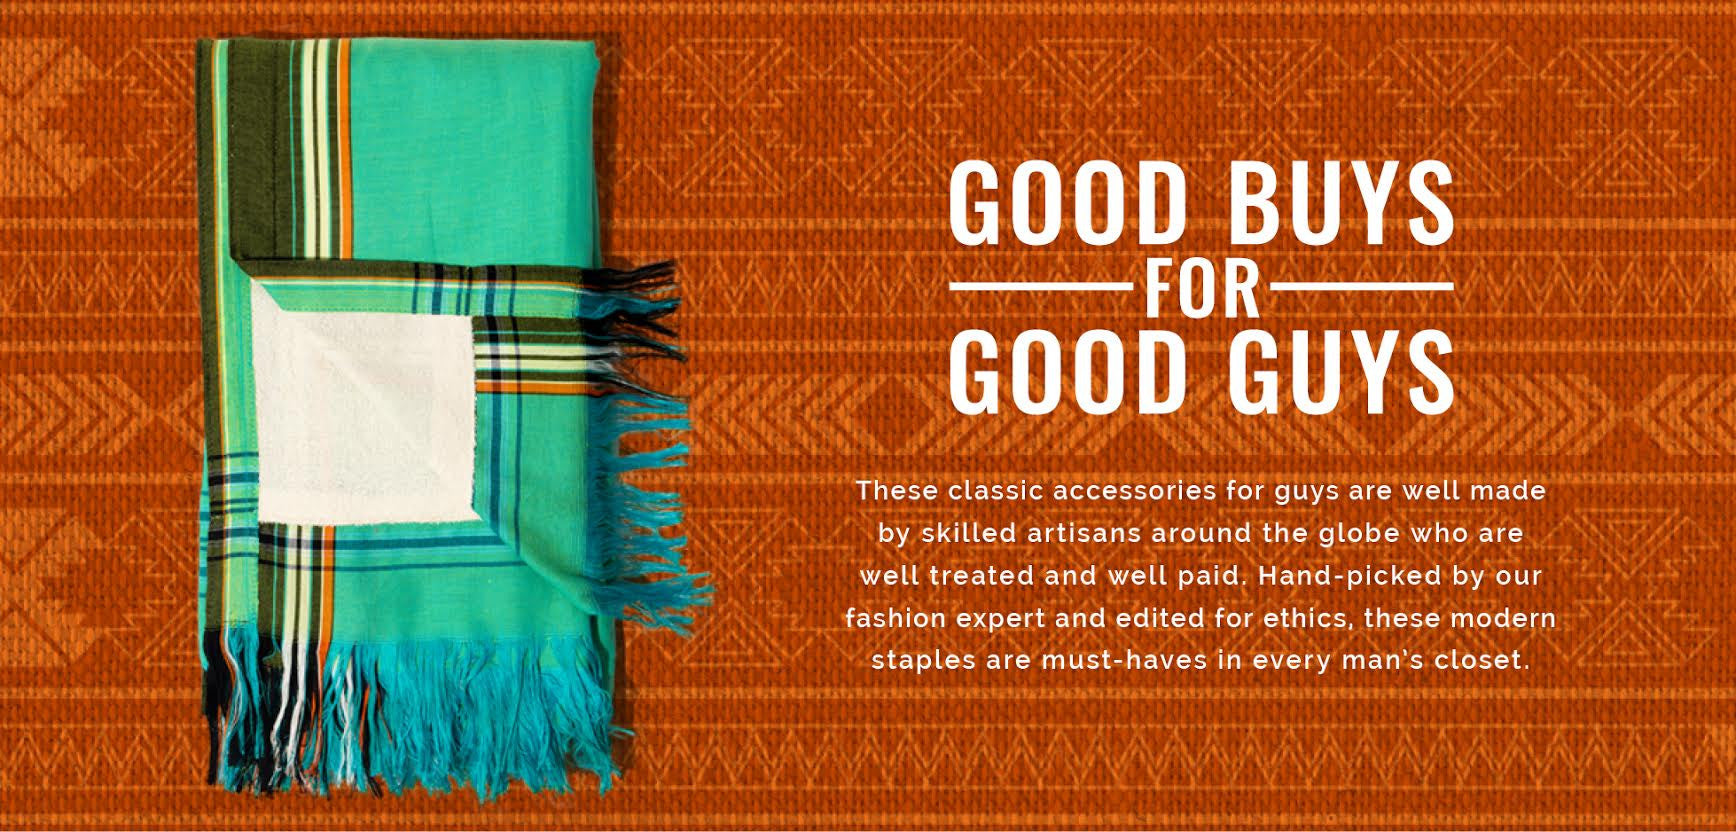 Men's Fair Trade Clothing, Shoes & Accessories | Accompany